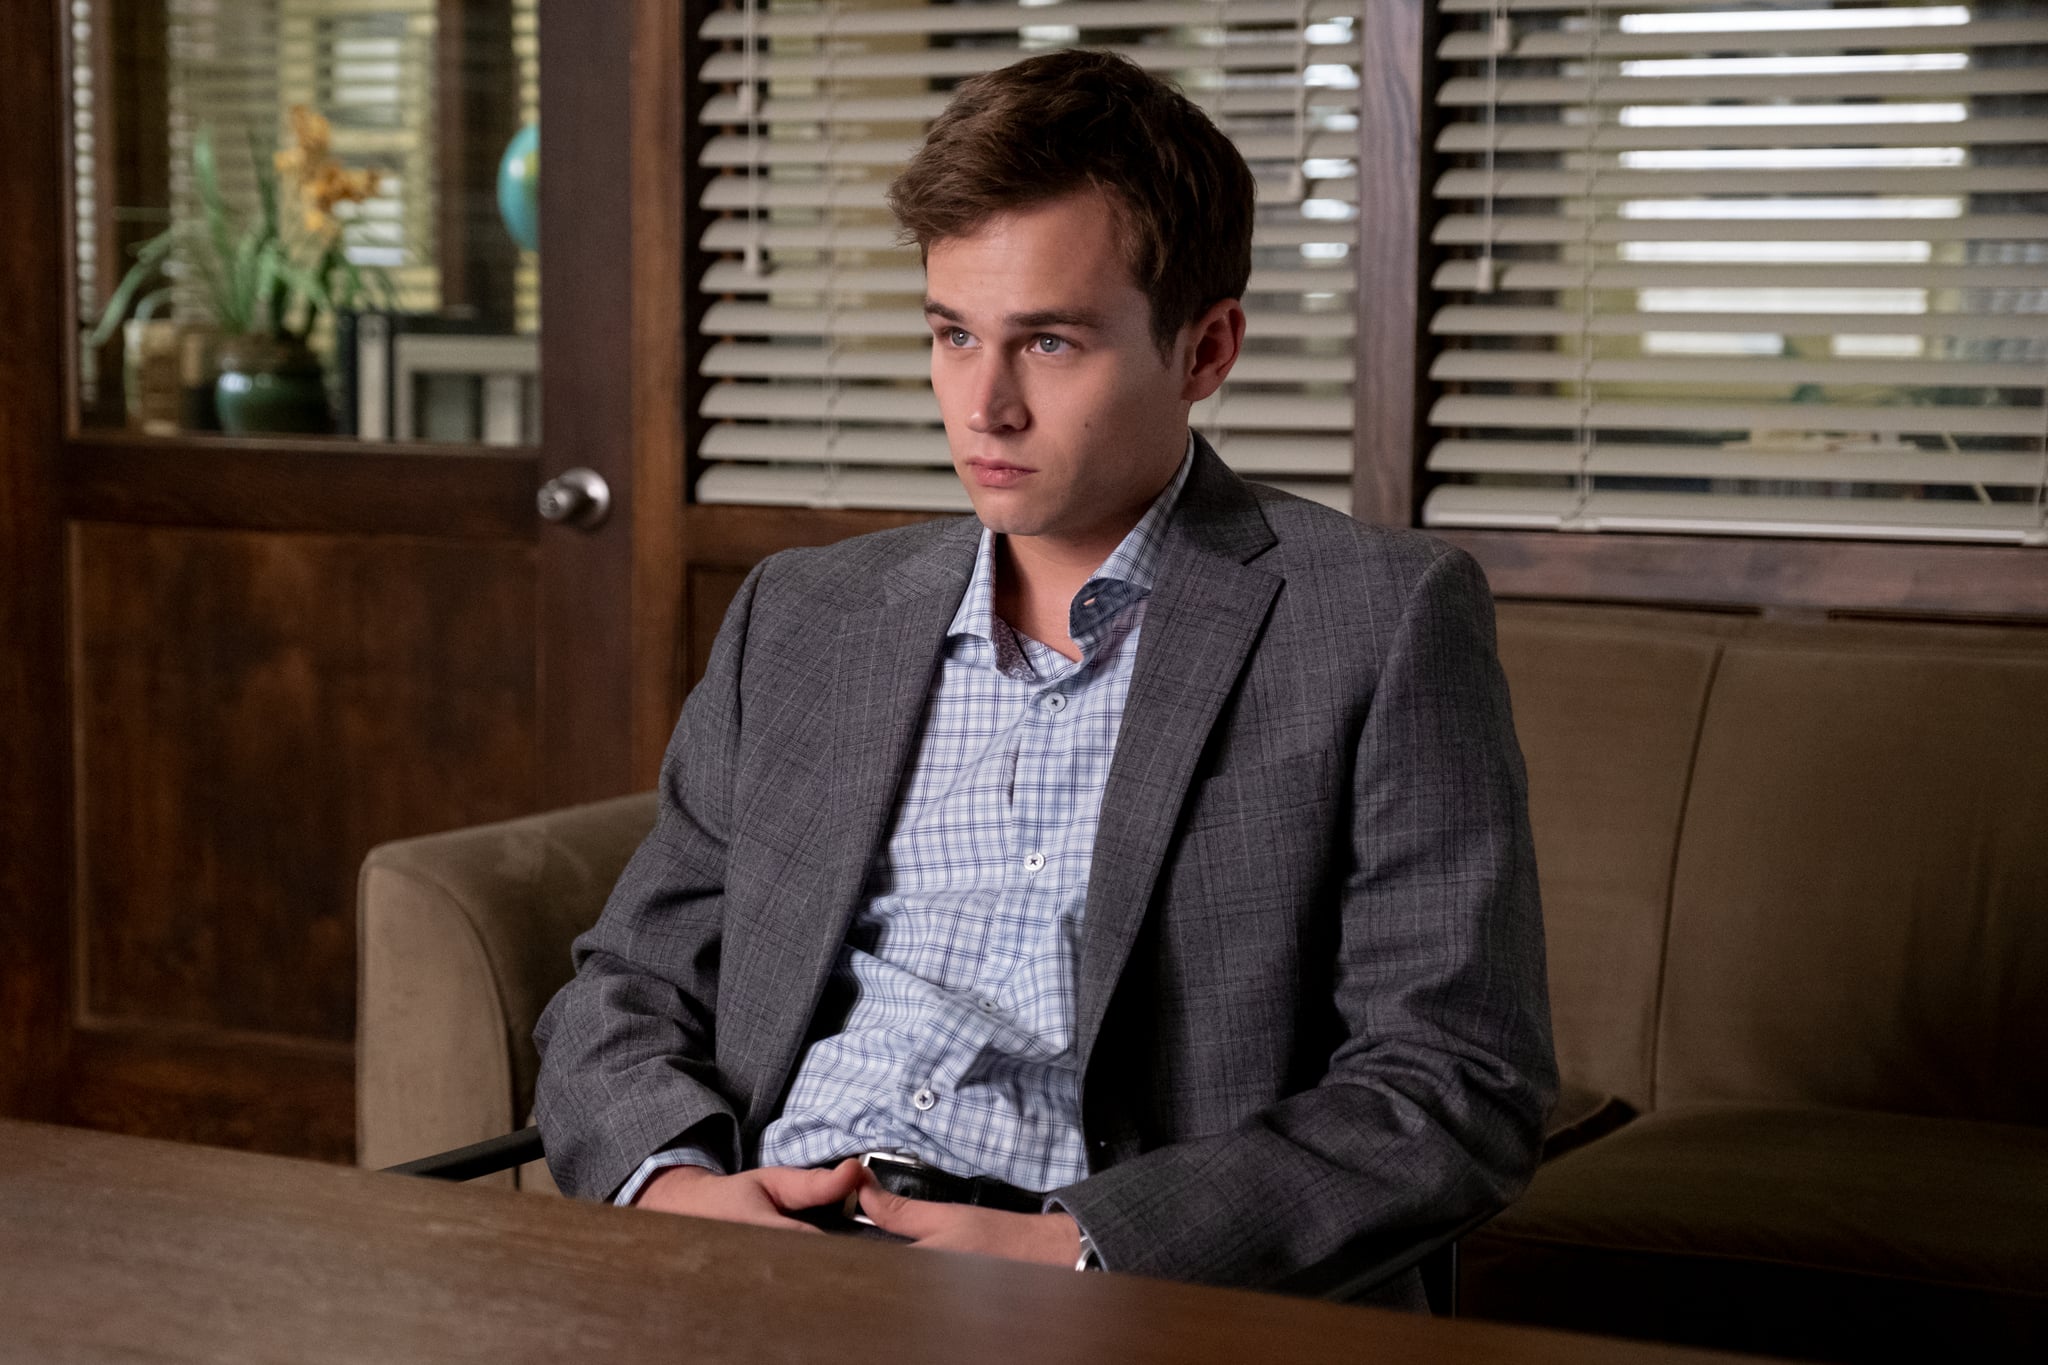 13 REASONS WHY  (L to R) BRANDON FLYNN as JUSTIN FOLEY in episode 407 of 13 REASONS WHY  Cr. DAVID MOIR/NETFLIX  2020